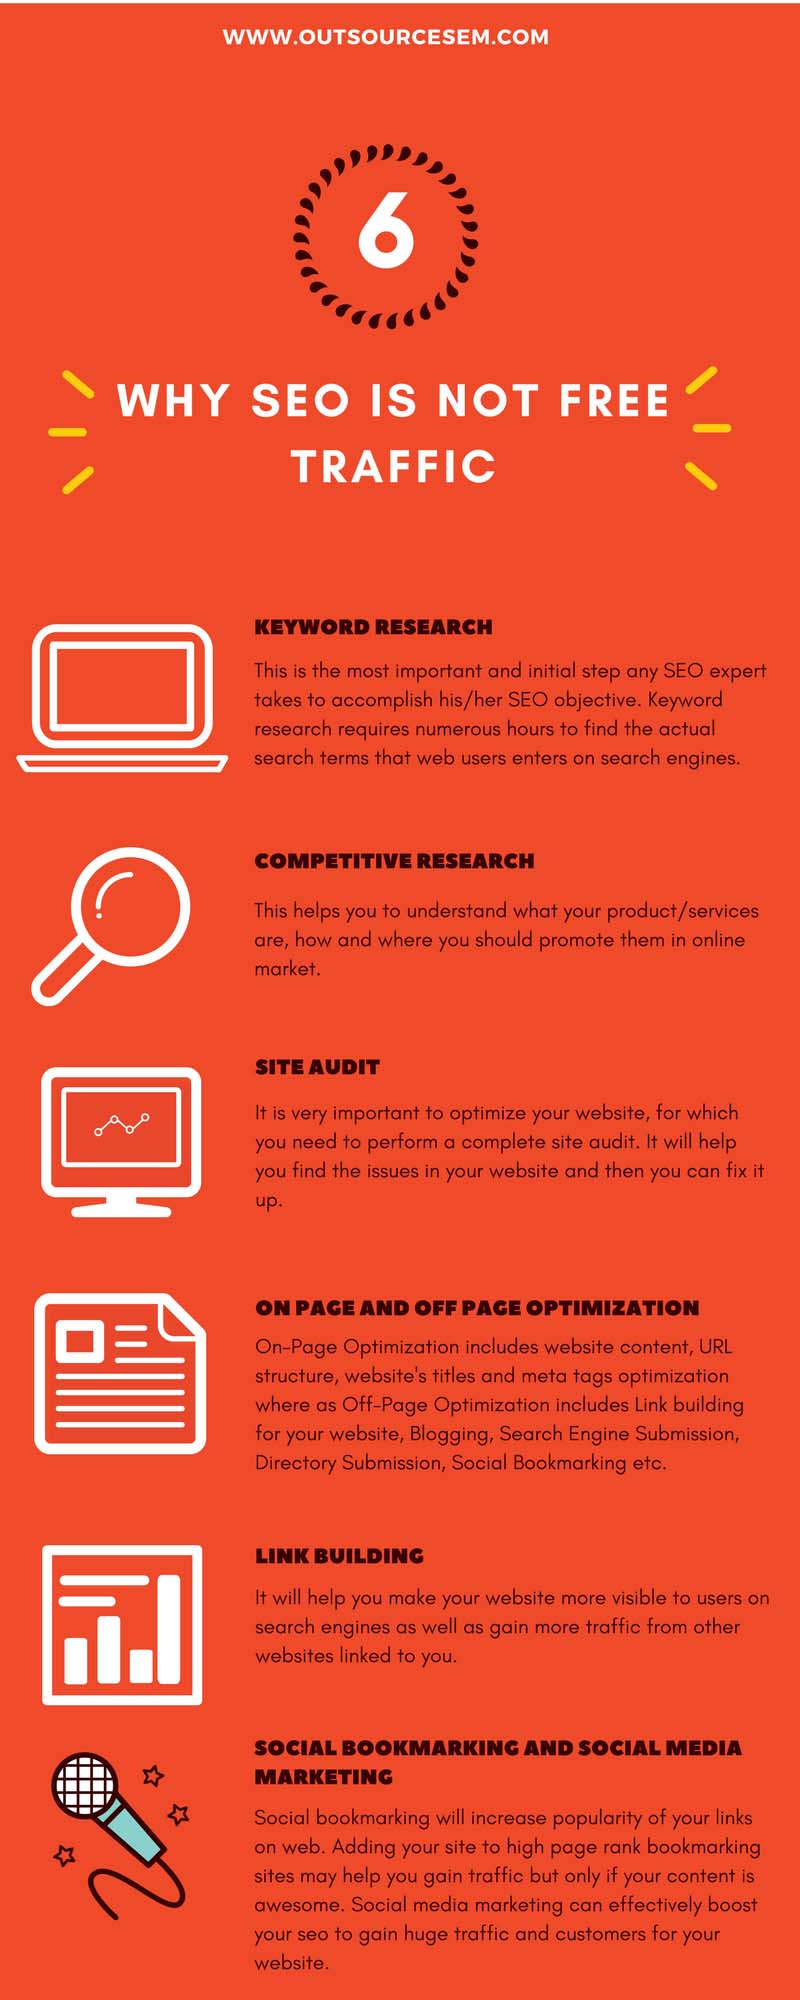 why-seo-is-not-free-traffic-infographic